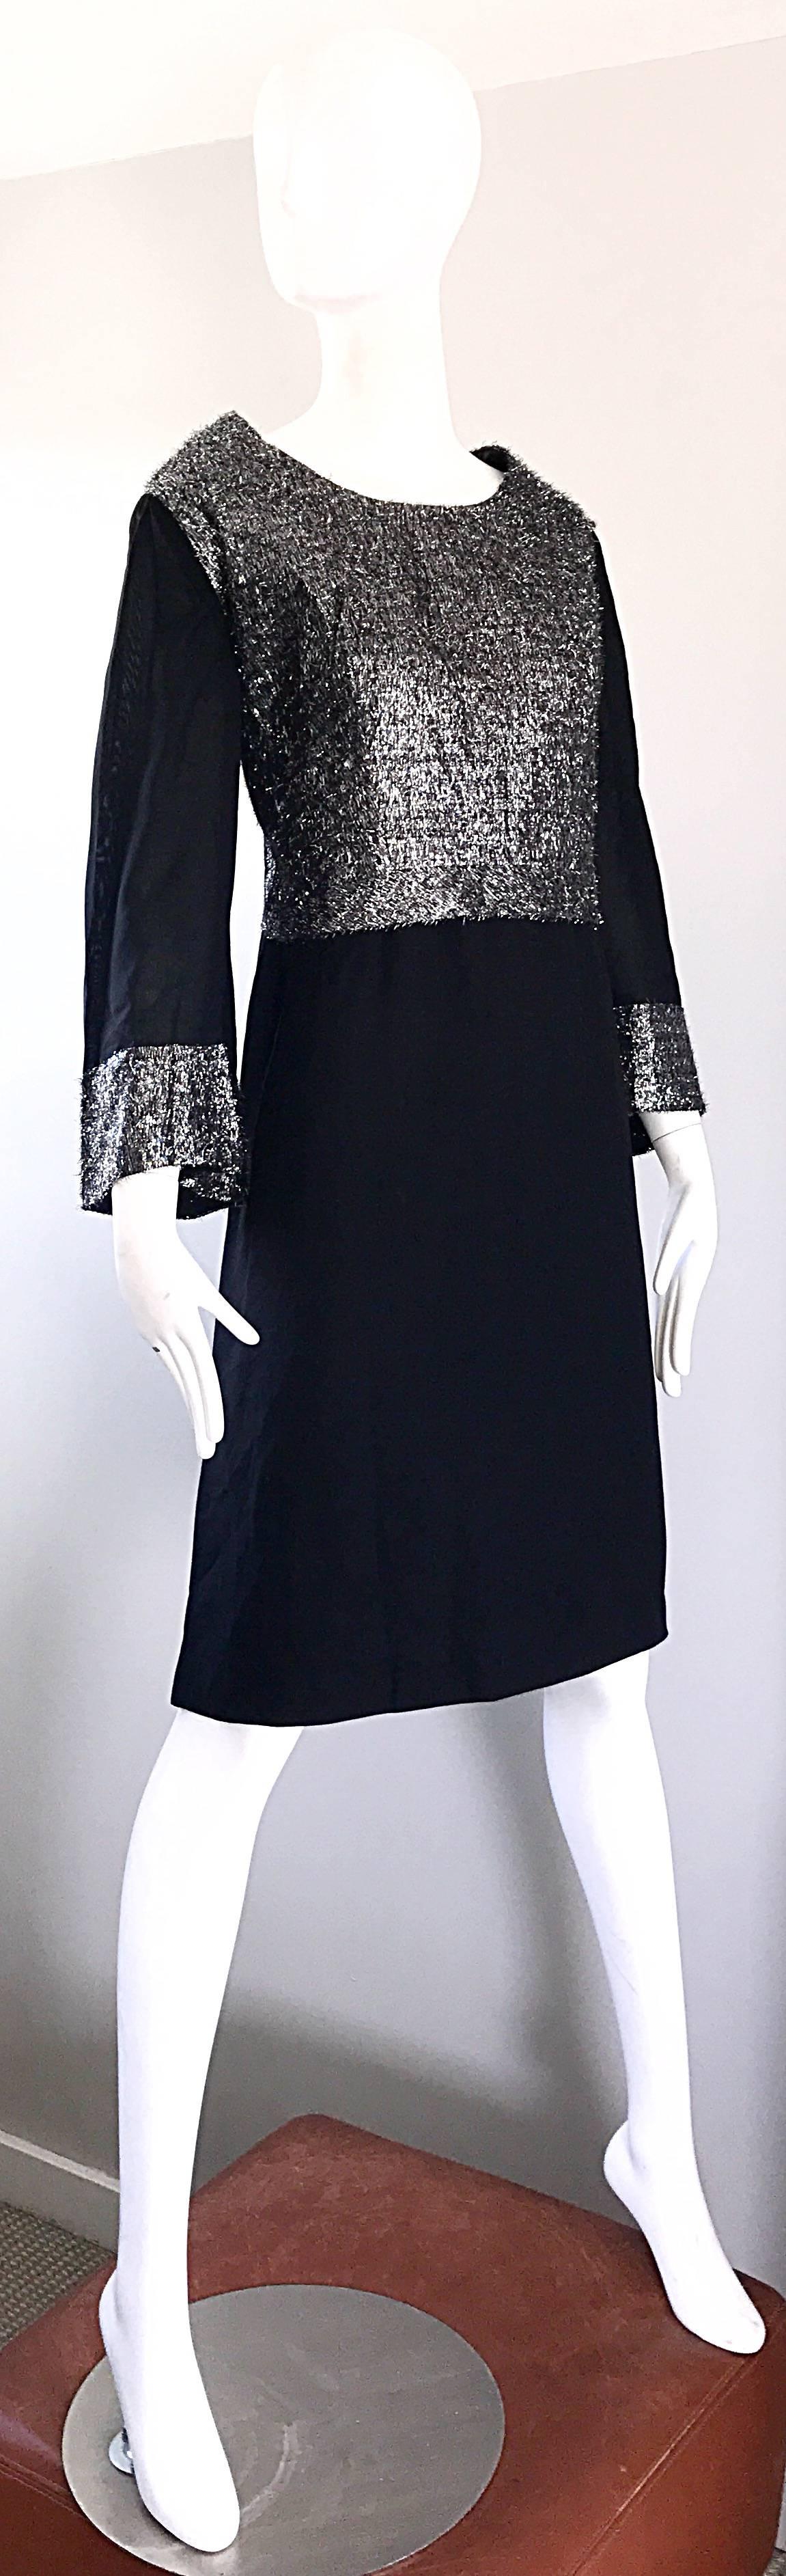 Chic 1960s Plus Size 16 / 18 Silver + Black 60s Vintage Bell Sleeve Shift Dress For Sale 1